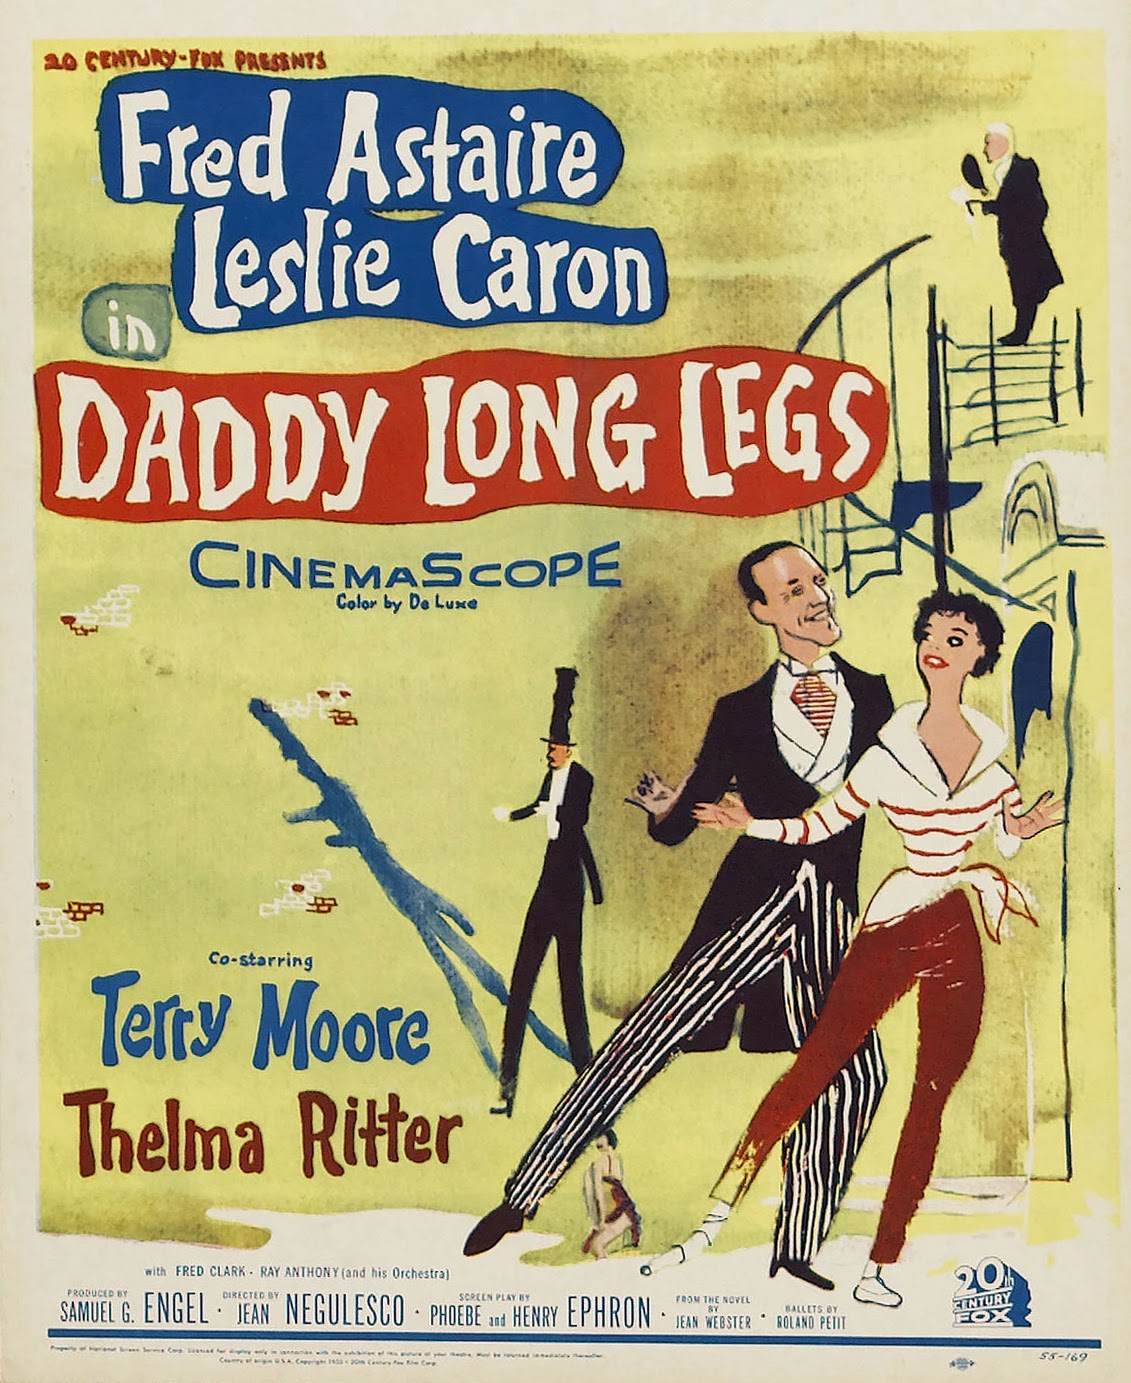 Astaire, fred, leslie, caron, daddy longlegs, musical, classic film, never fully dressed, withoutastyle,